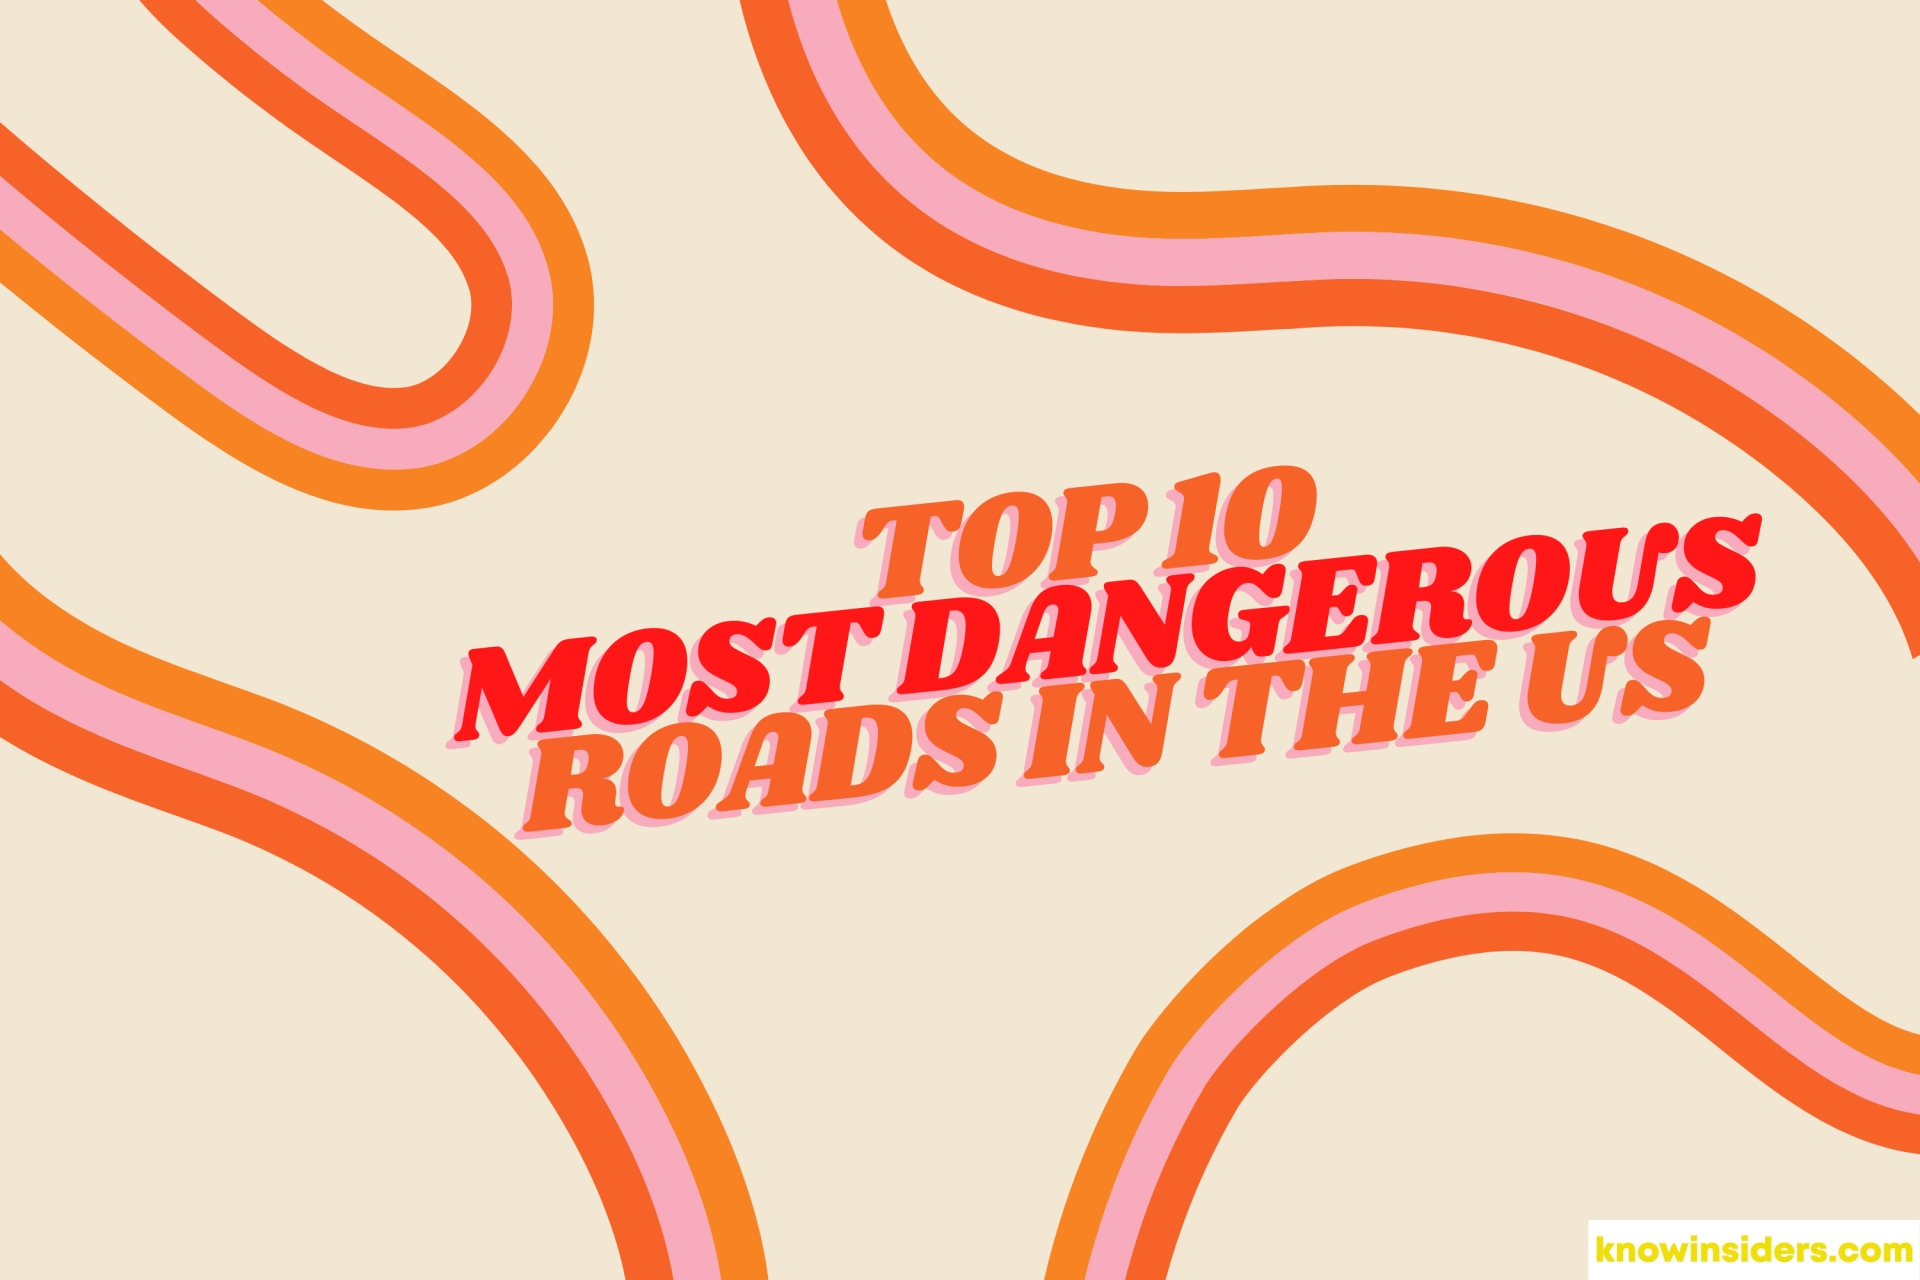 Top 10 Most Dangerous Roads In The US